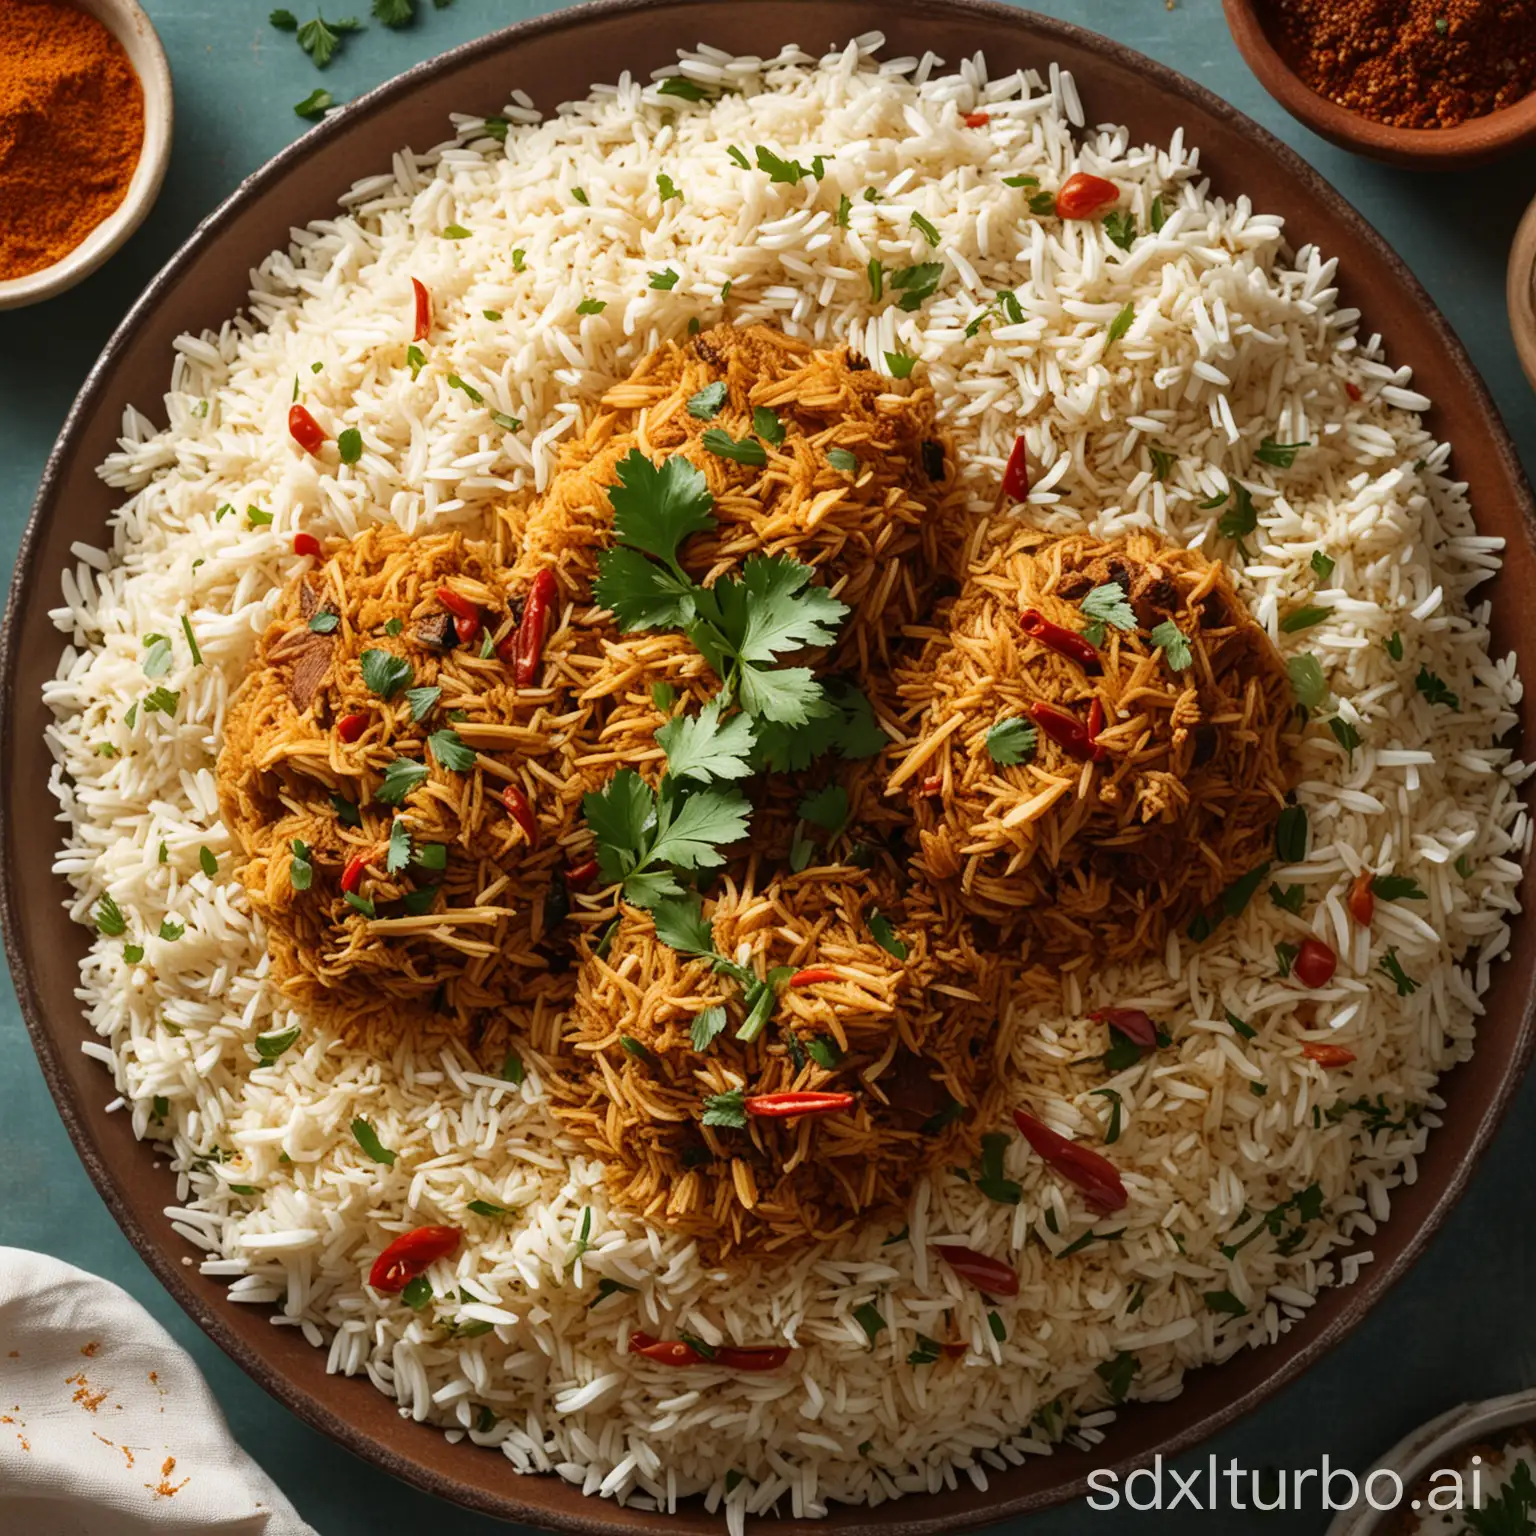 A plate of steaming, fragrant biryani sits on a bed of fluffy white rice. The biryani is garnished with cilantro and a sprinkle of red chili powder, and the aroma is enticing.